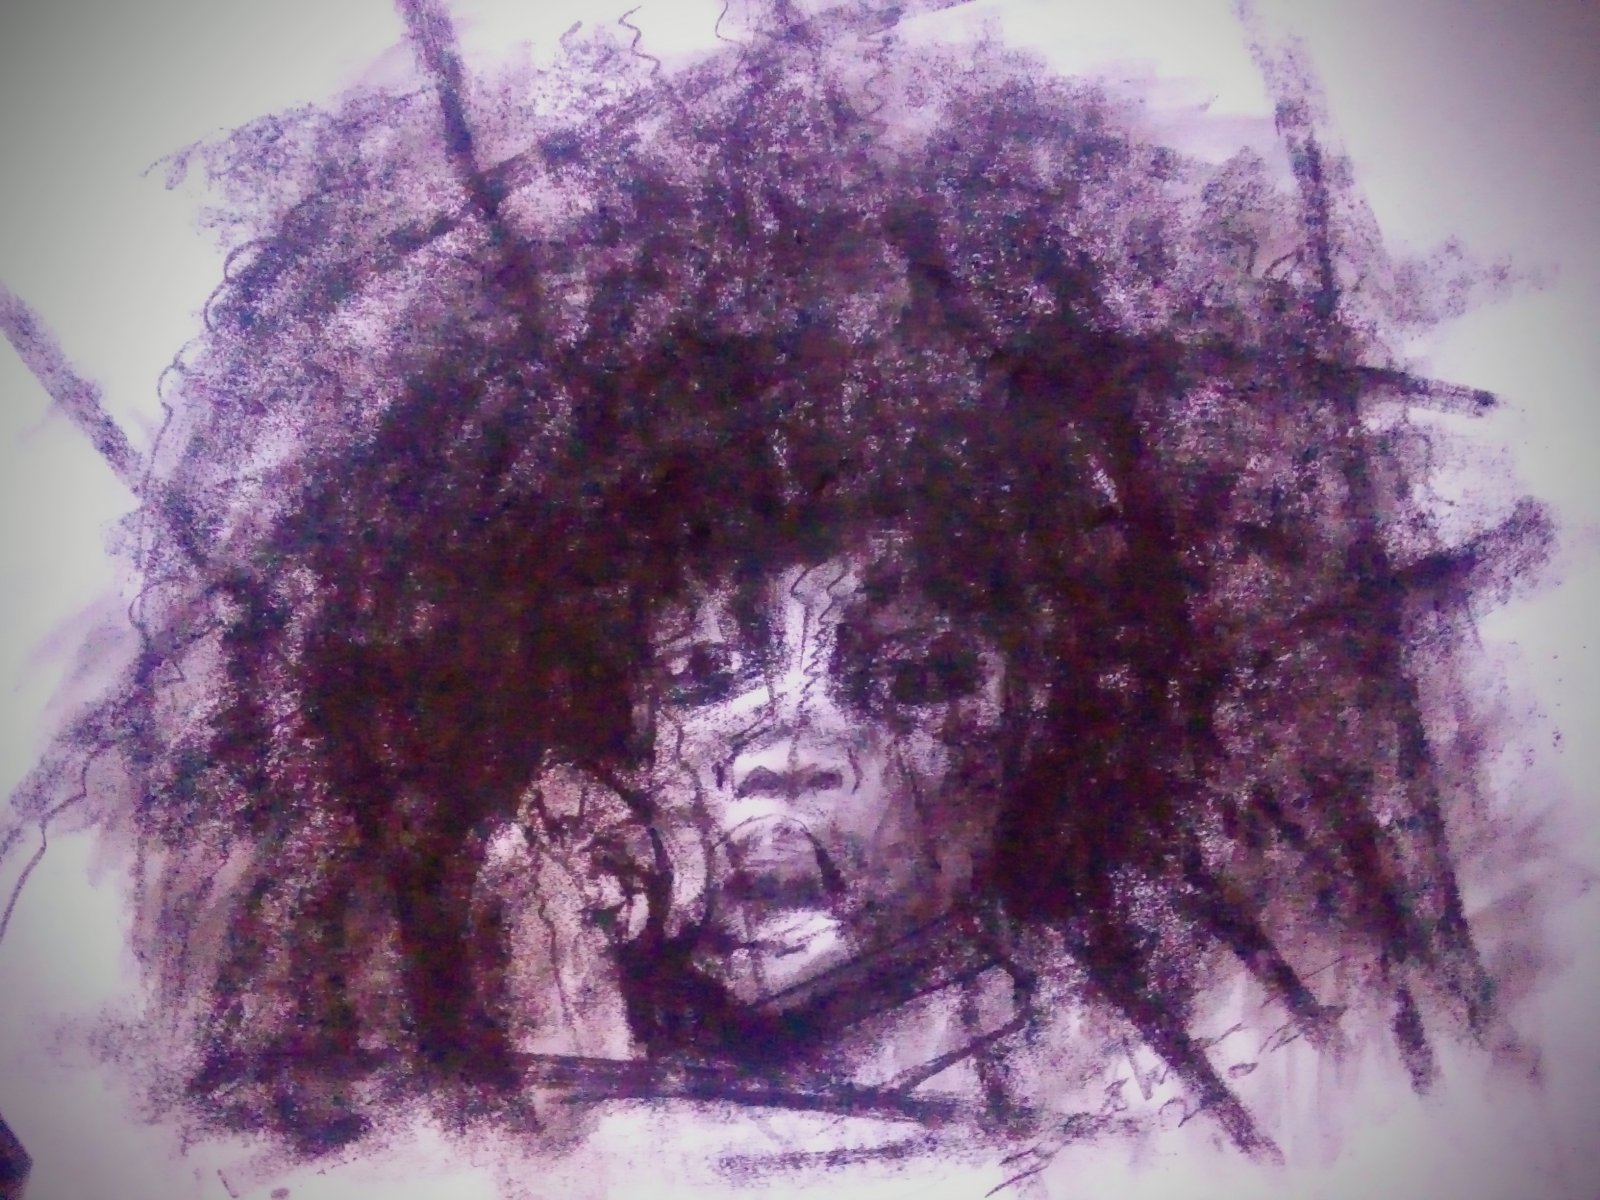 In my attached drawing made by me, the lady has a natural hair that seems unkept, with her hand on her chin kept Wondering what to tell her abuser, she's perplexed and wonder what way to educate her abuser.